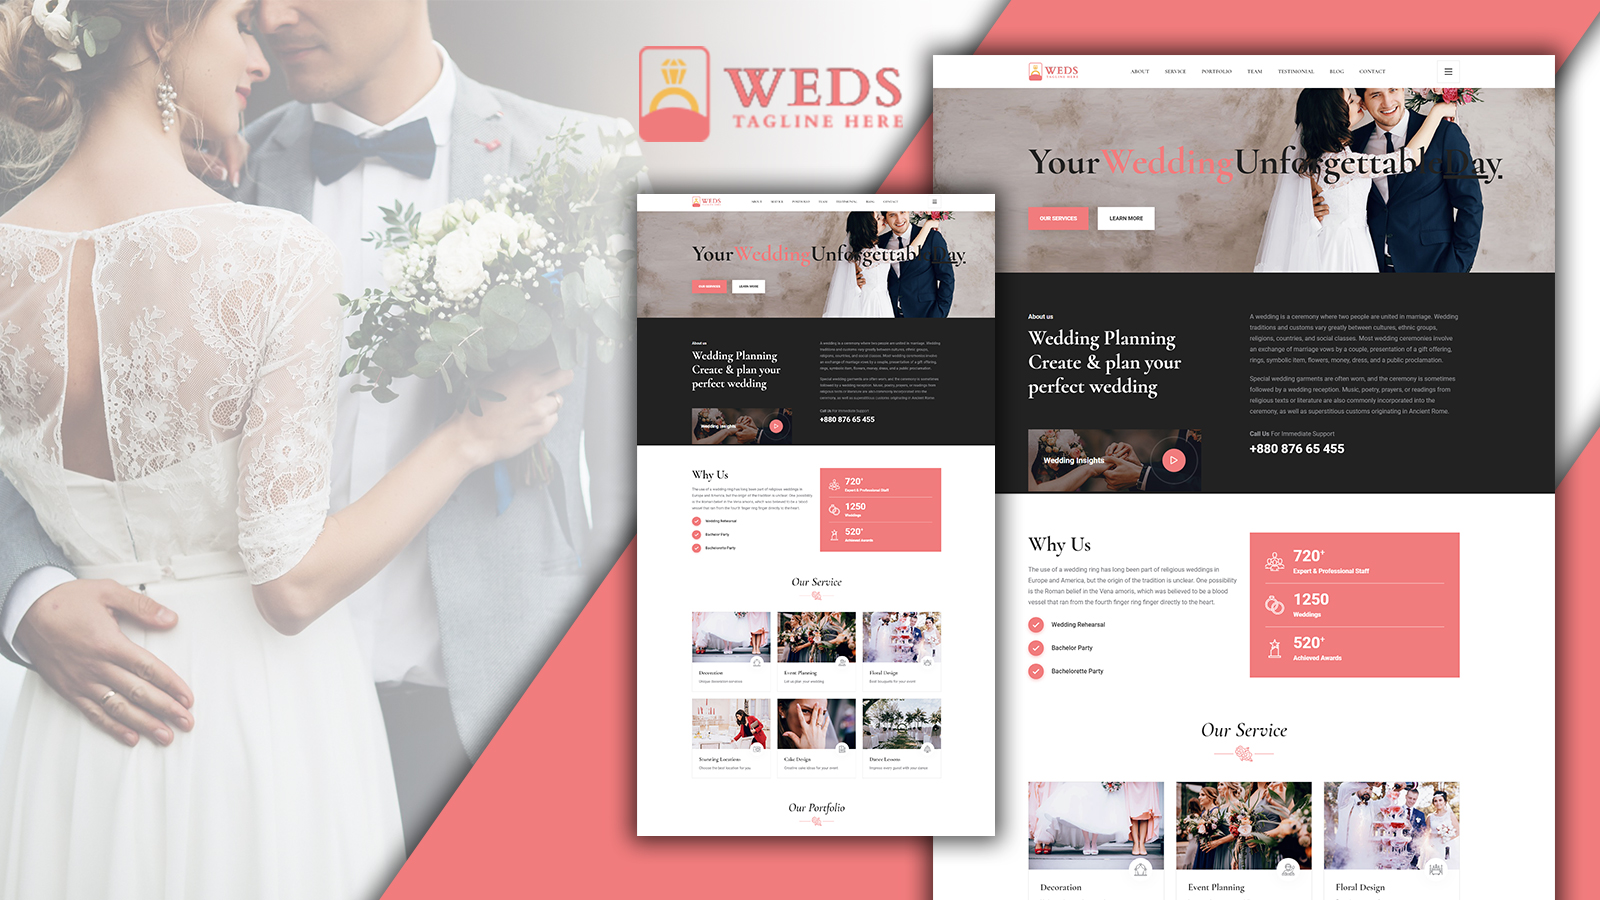 Weds Wedding Planning Agency Landing Page HTML5 Template